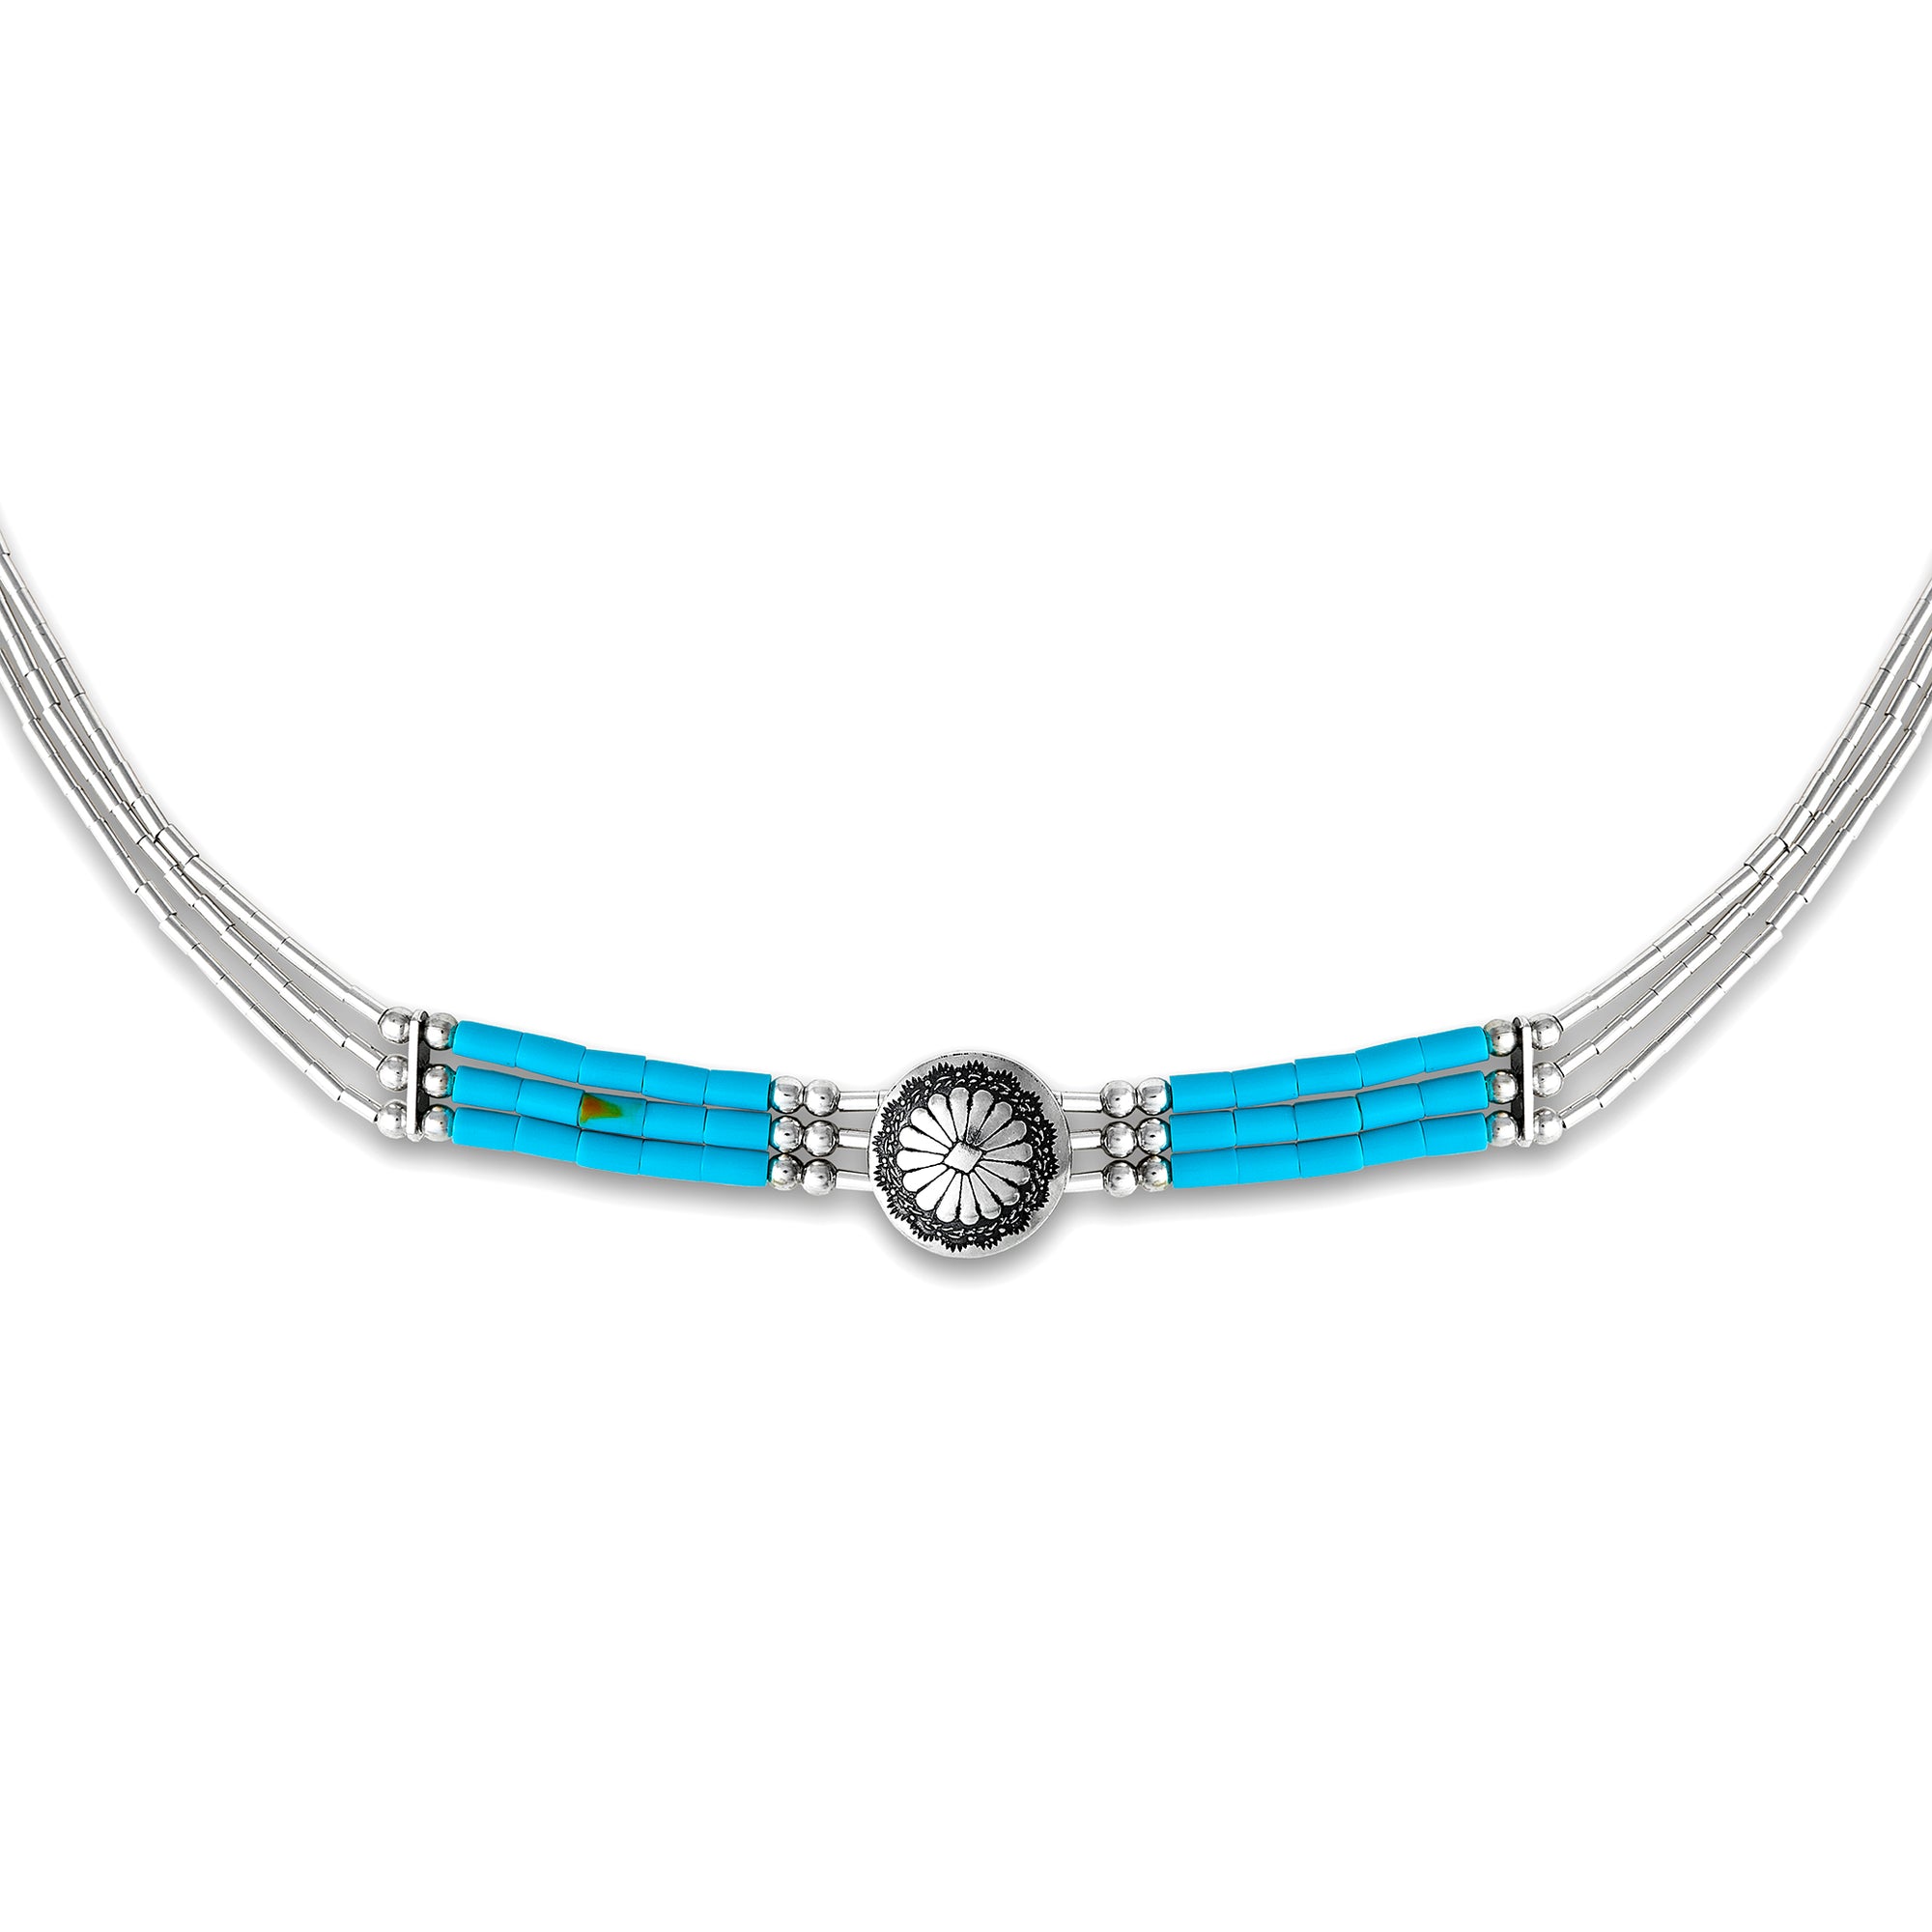 Turquoise and silver beaded necklace